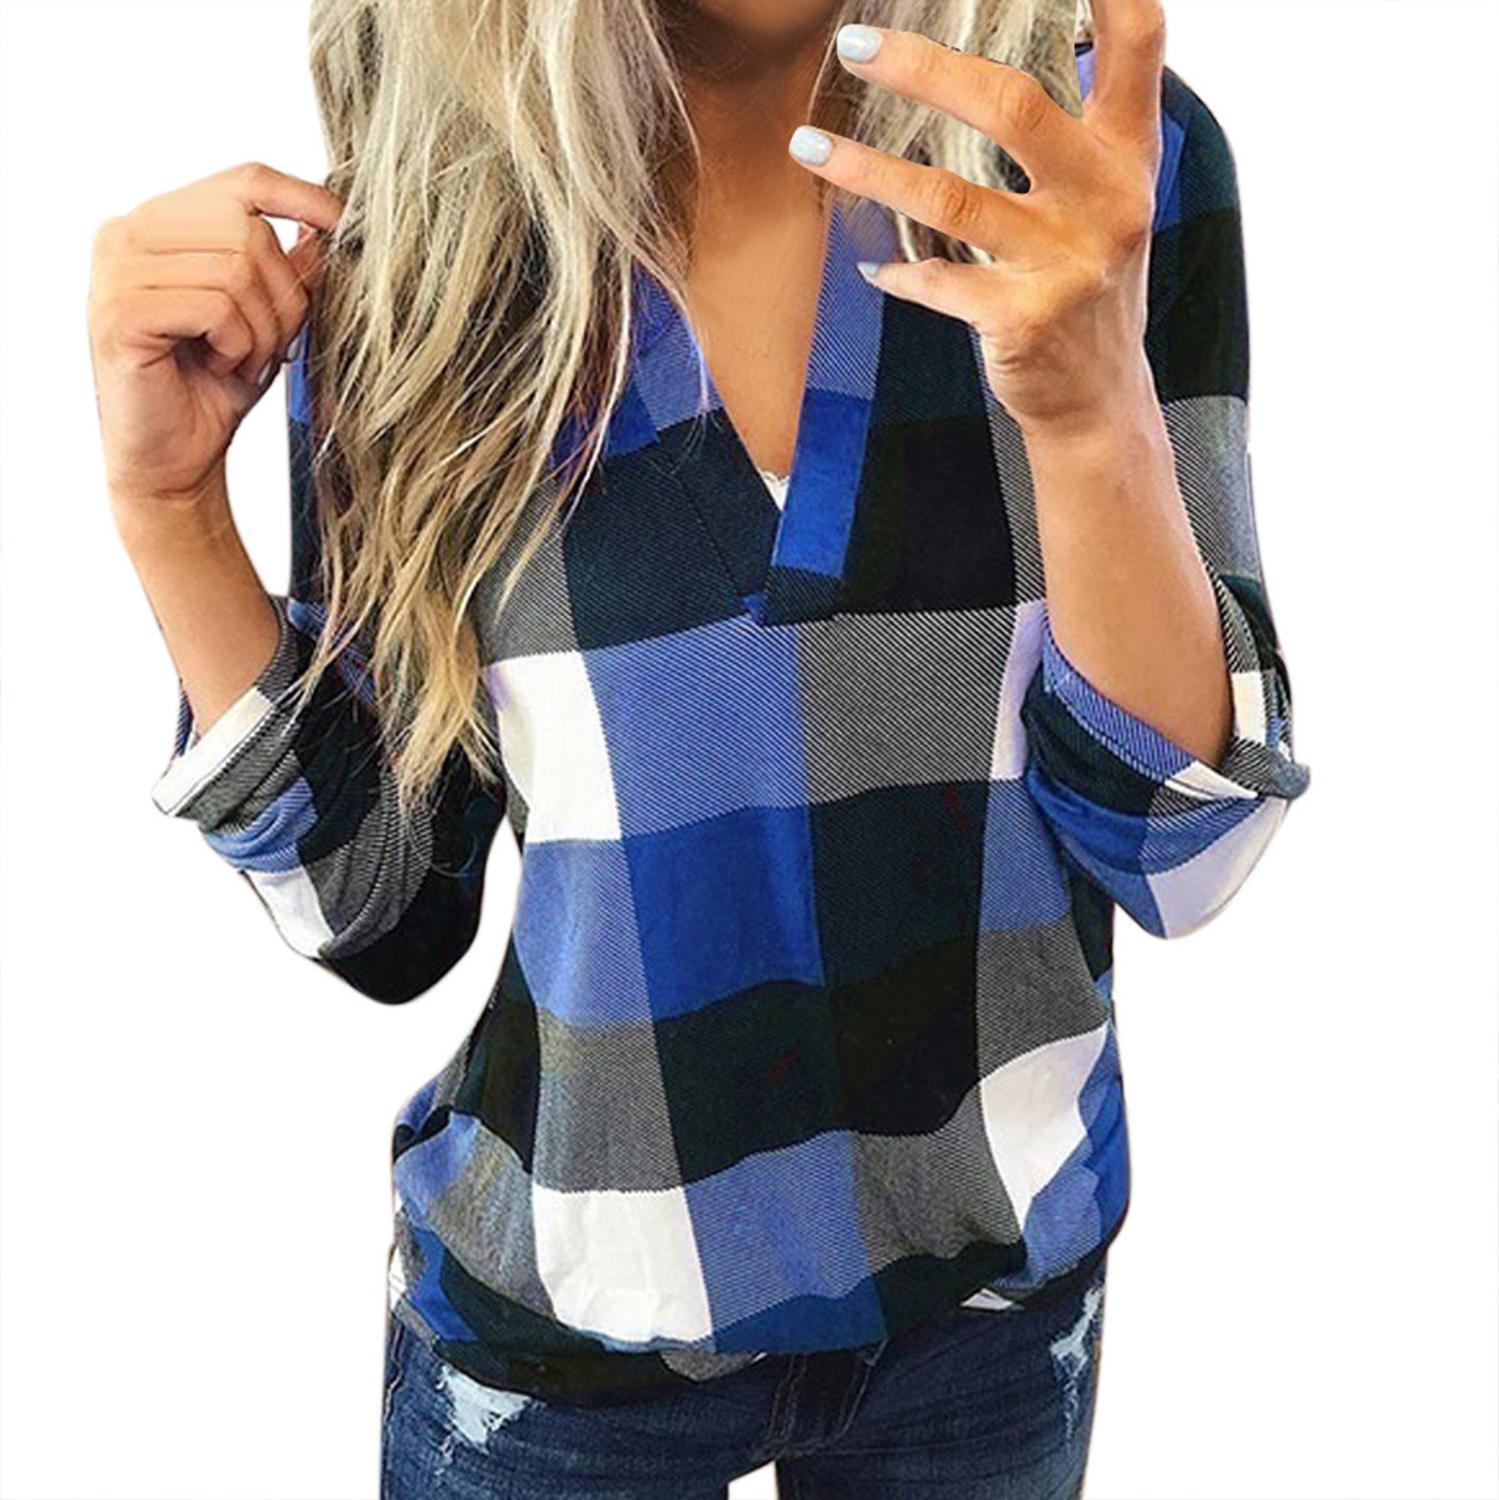 Womens Tops And Blouses Plus Size Autumn Women'S Plaid Blouse Shirts Sexy V Neck Female Blouses